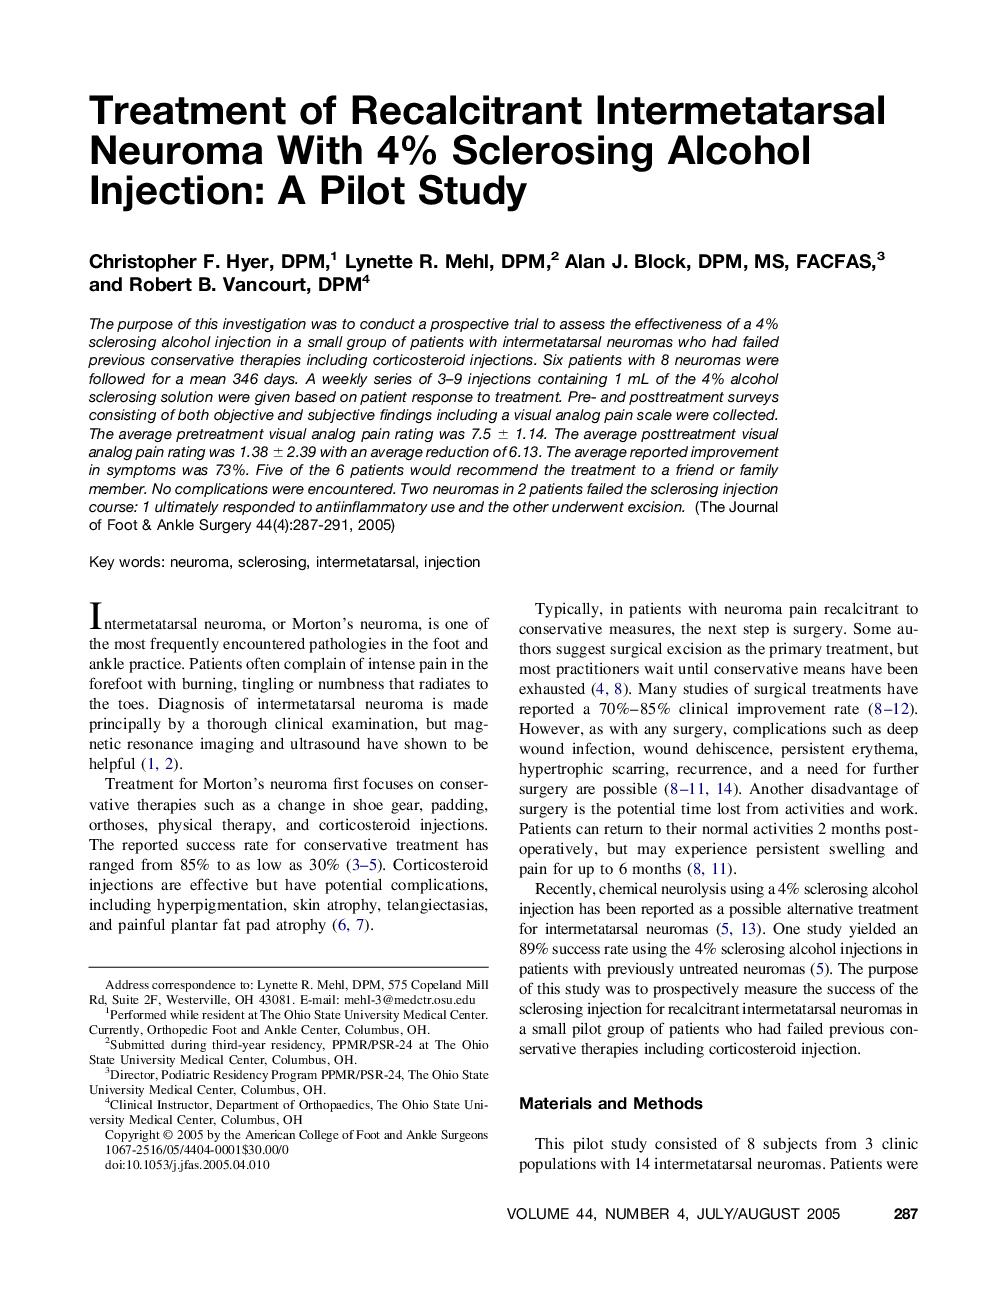 Treatment of Recalcitrant Intermetatarsal Neuroma With 4% Sclerosing Alcohol Injection: A Pilot Study